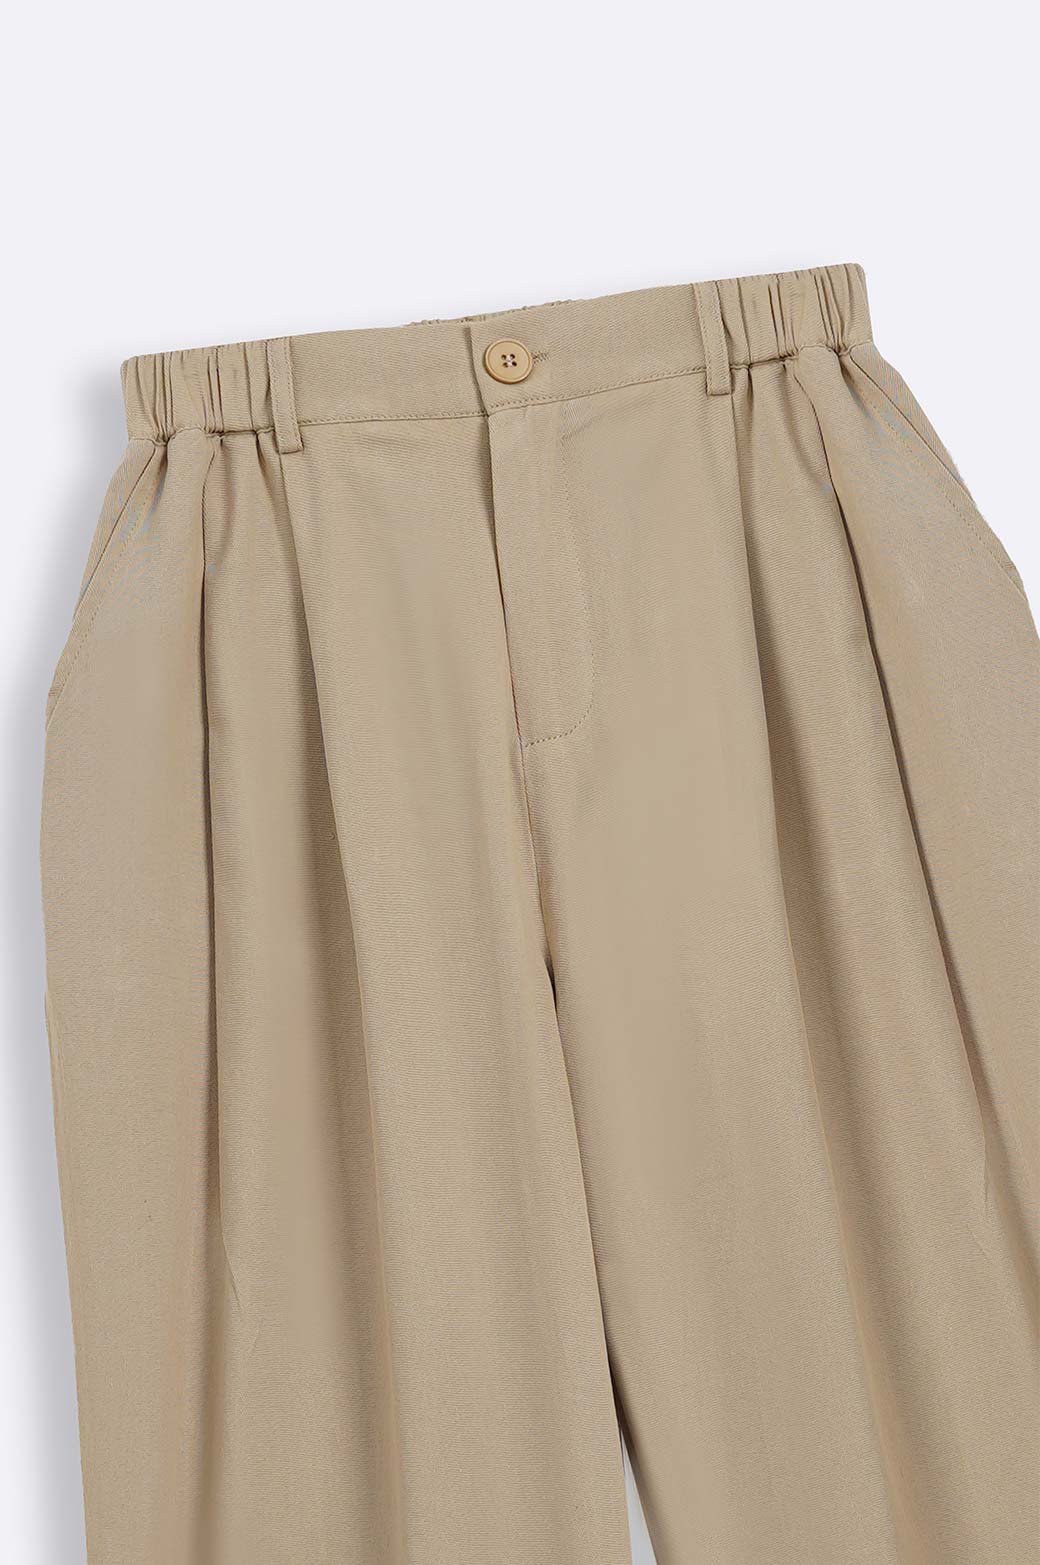 BEIGE TAILORED WIDE PANT